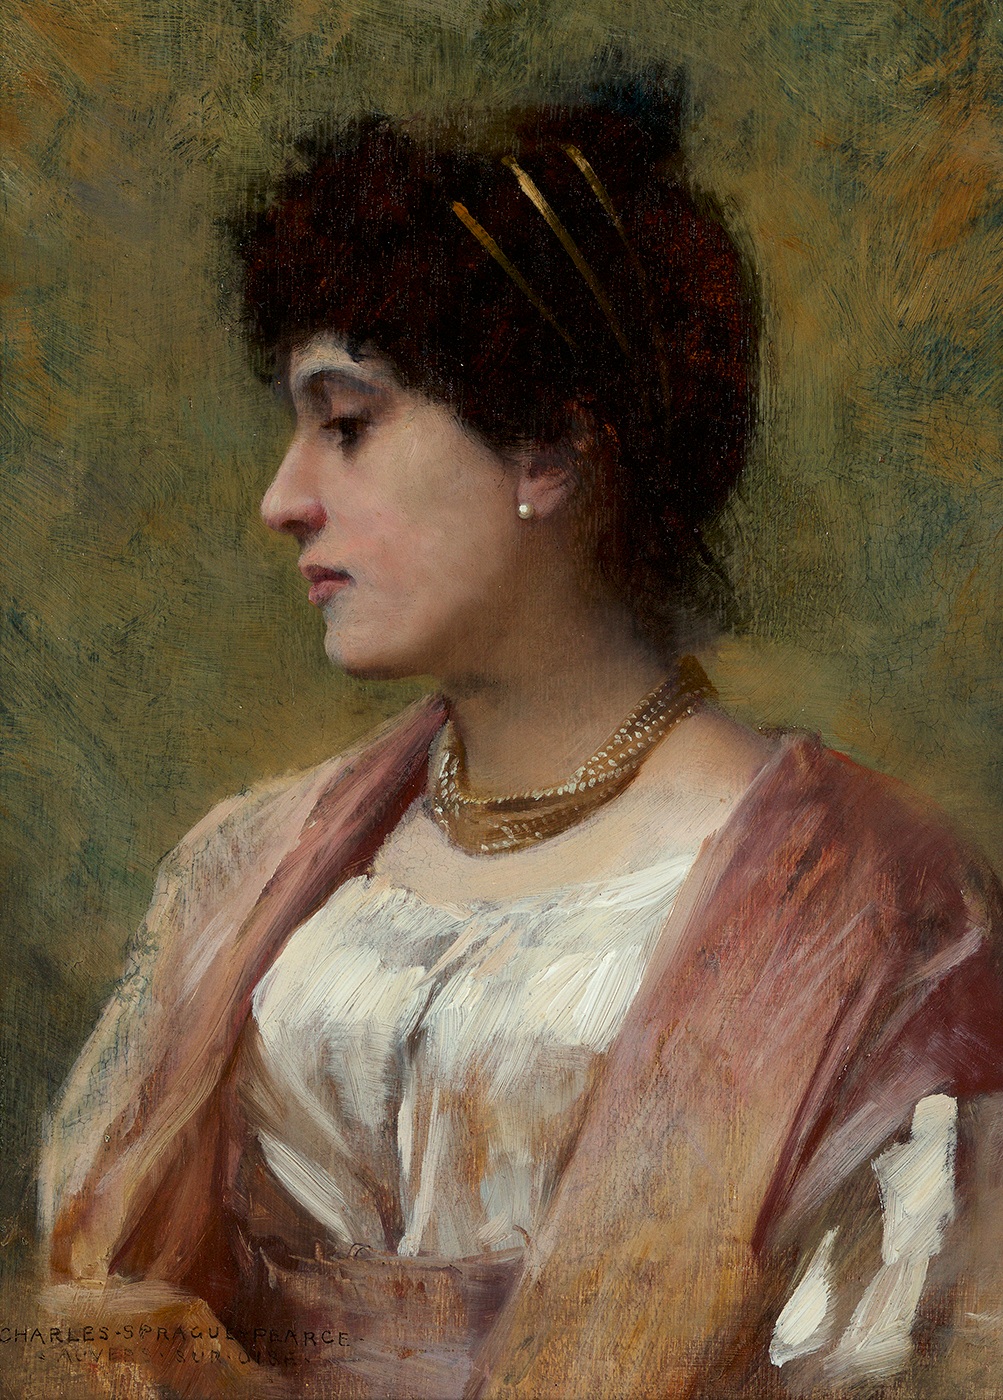 Charles Sprague Pearce (1851-1914), A Lady of the Directoire